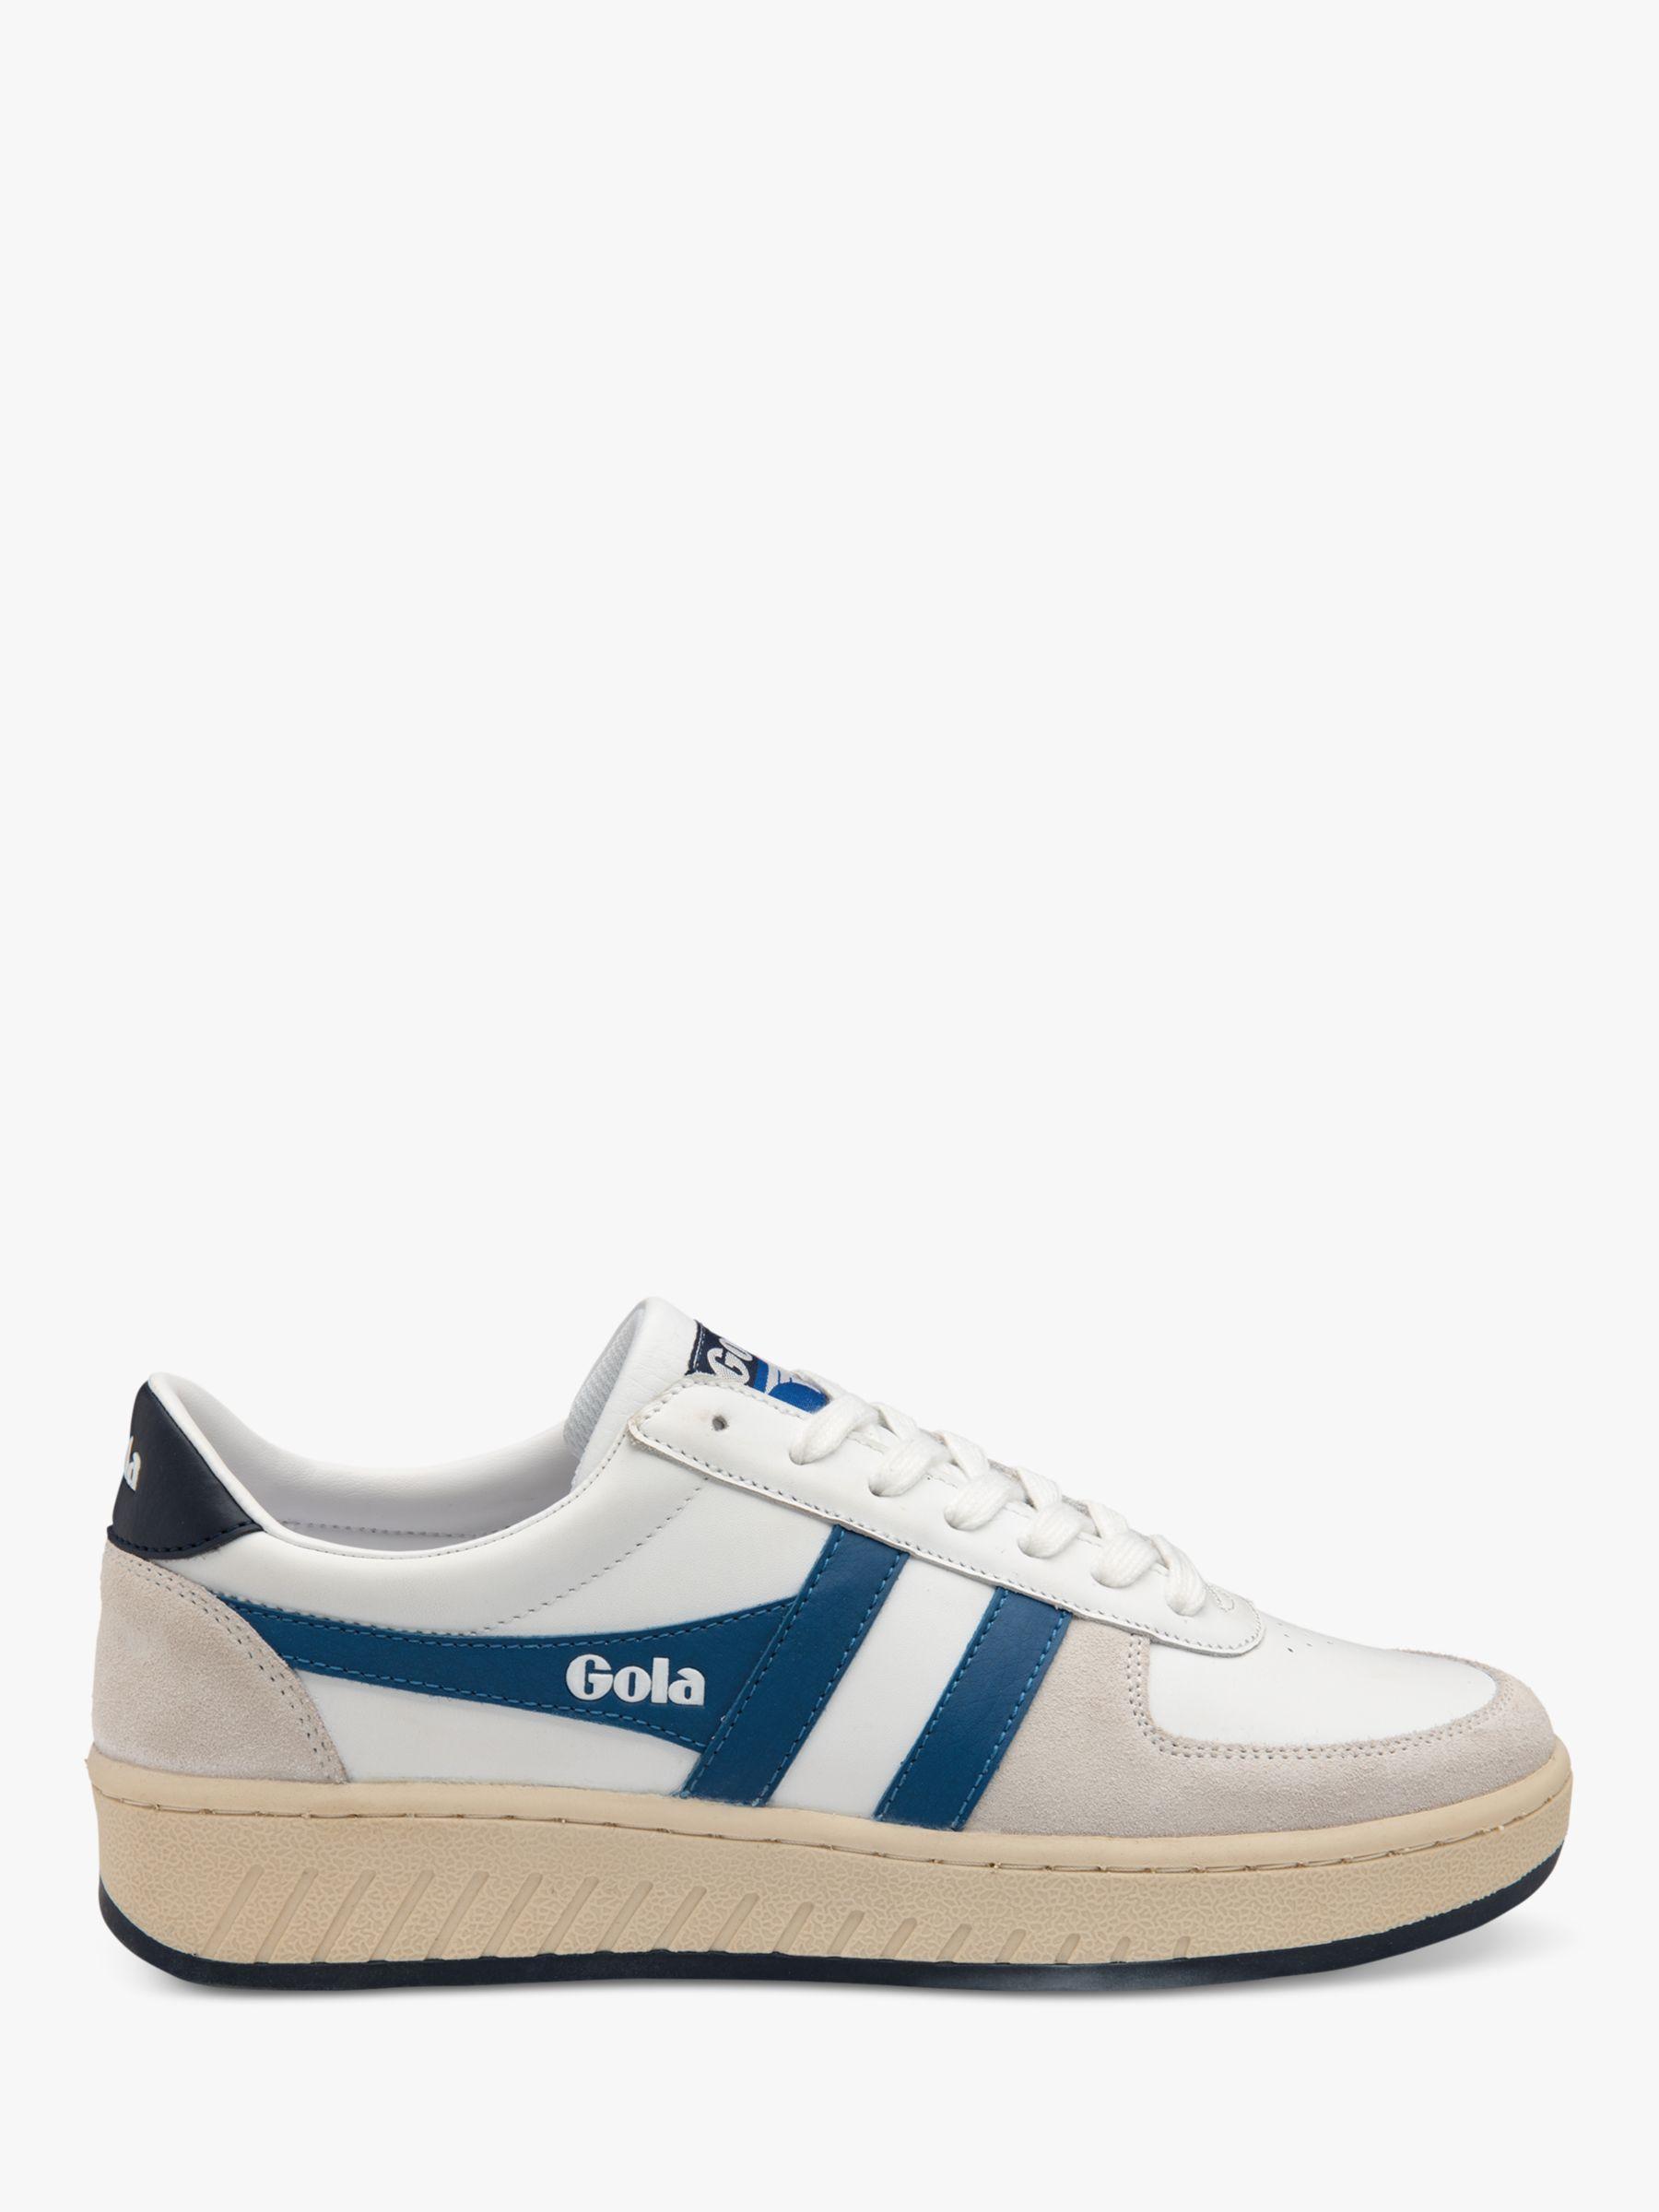 Gola Classics Grandslam Classic Leather Lace Up Trainers in Blue for ...